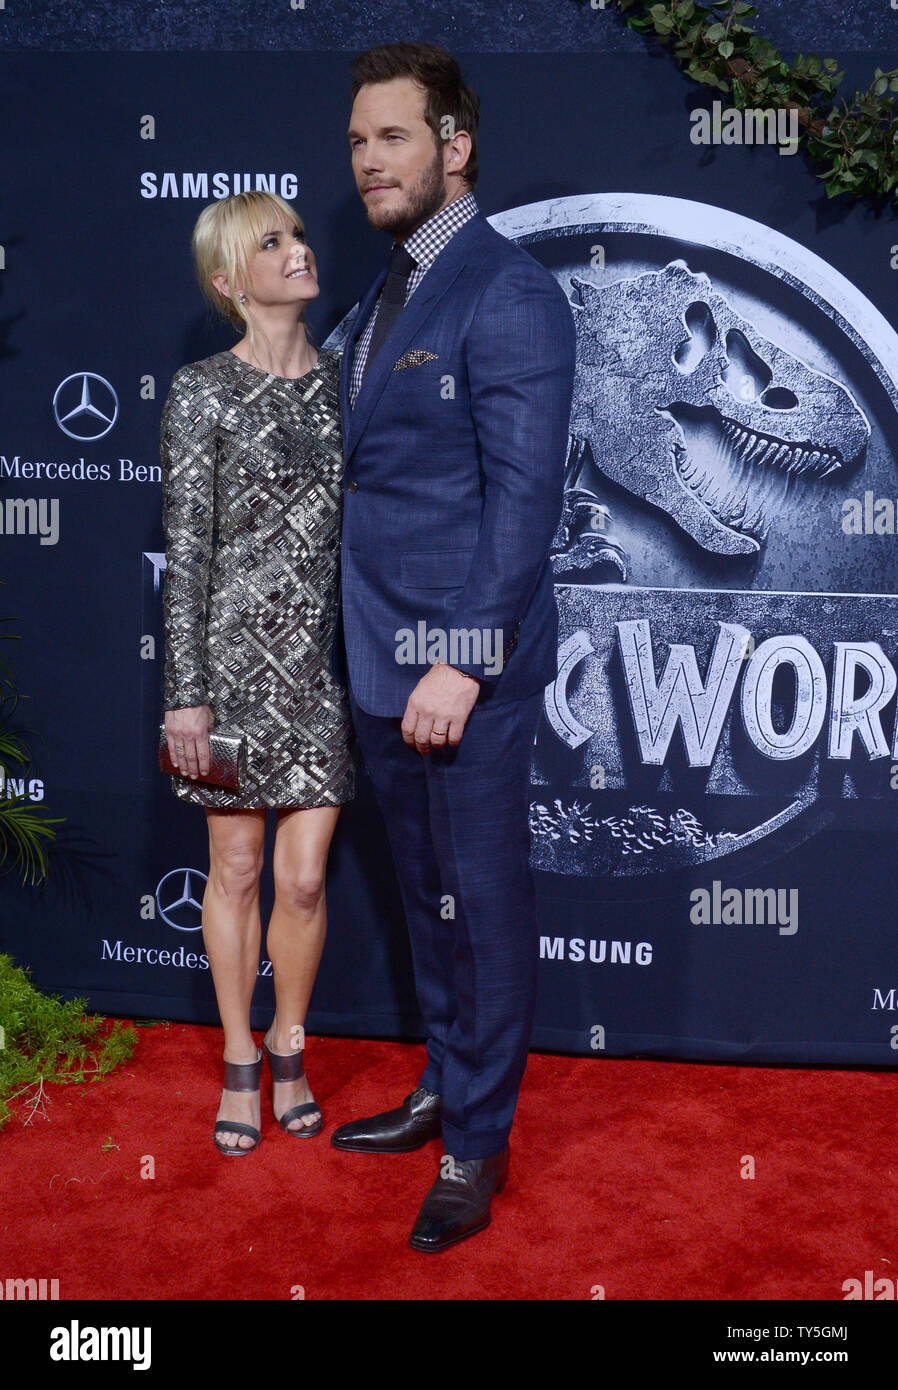 Cast member Chris Pratt and his wife, actress Anna Faris attend the premiere of the sci-fi motion picture thriller 'Jurassic World' at TCL Chinese Theatre in the Hollywood section of Los Angeles on June 9, 2015. Storyline:  Twenty-two years after the events of Jurassic Park, Isla Nublar now features a fully functioning dinosaur theme park, Jurassic World, as originally envisioned by John Hammond. After 10 years of operation and visitor rates declining, in order to fulfill a corporate mandate, a new attraction is created to re-spark visitor's interest, which backfires horribly.  Photo by Jim Ru Stock Photo